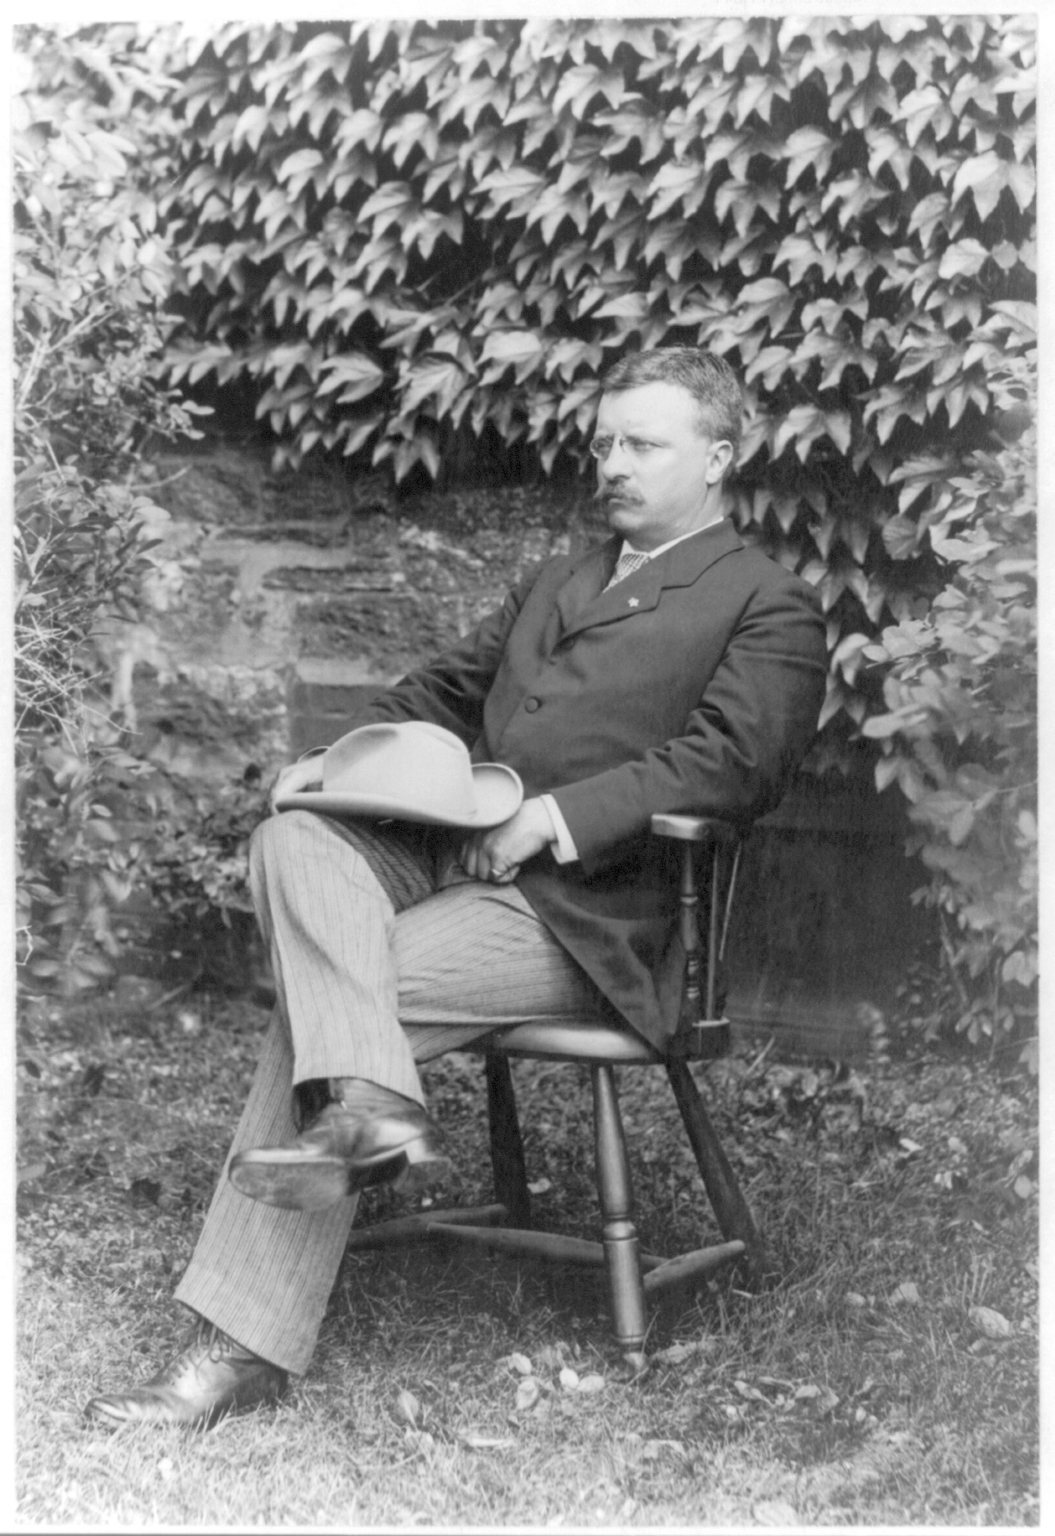 Photograph showing Theodore Roosevelt standing in an open area with lake behind him.